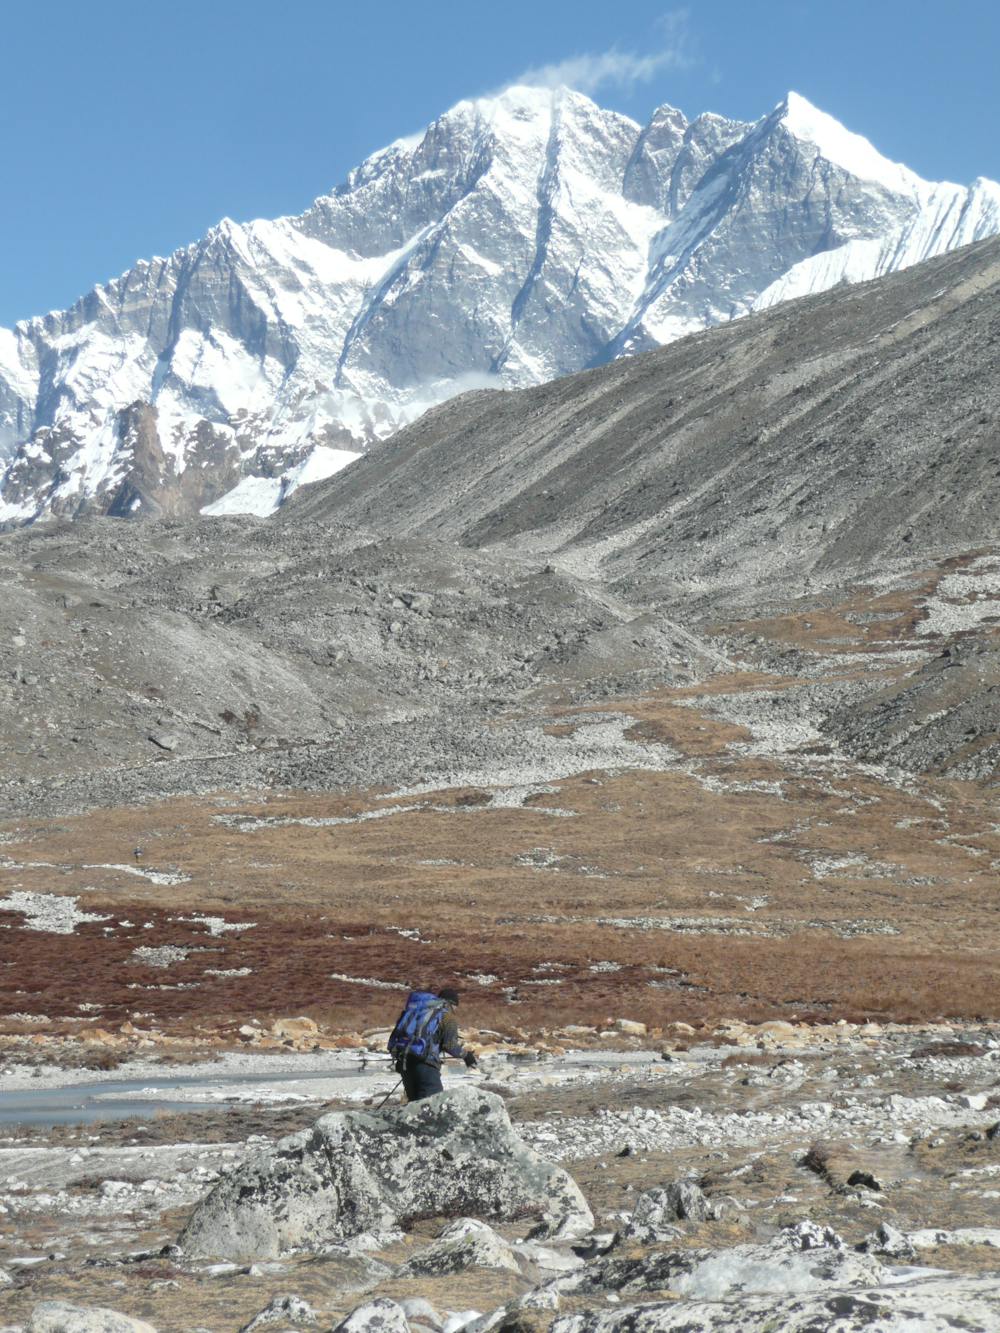 Typically desolate terrain in the Hongku, with the imposing south face of Lhotse dominating the view ahead.